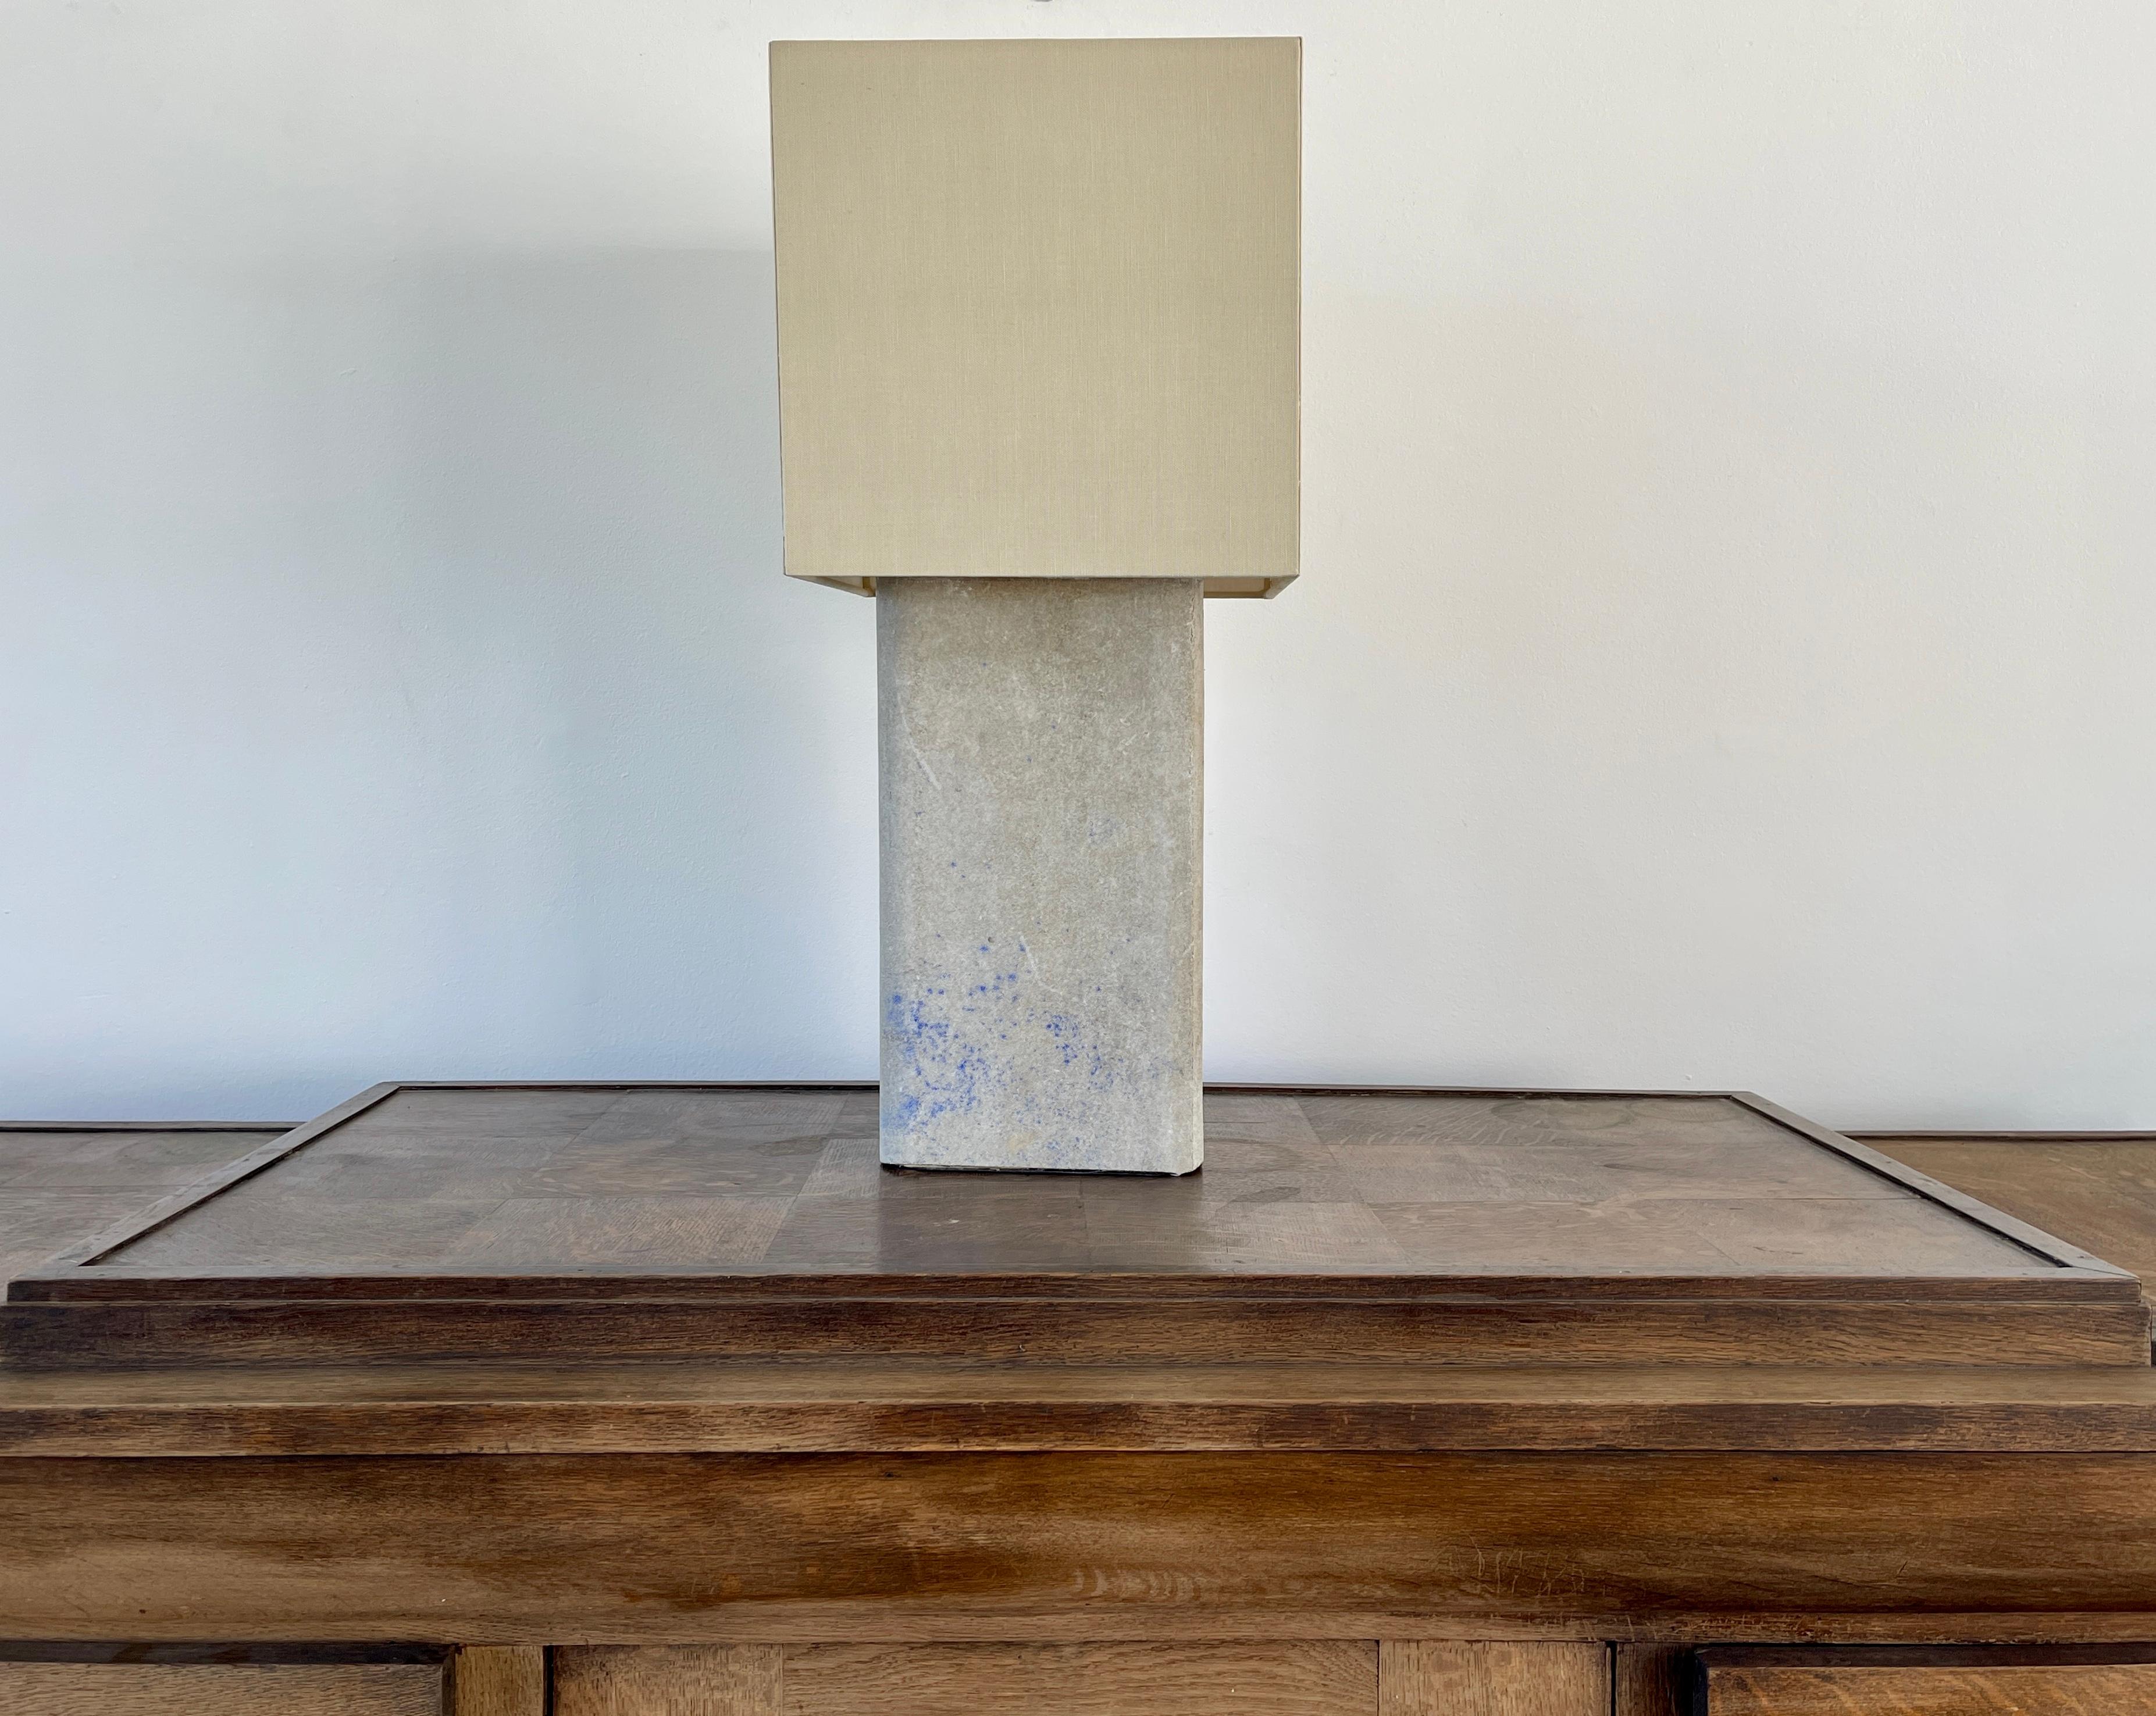 Willy Guhl concrete cube made into a table lamp with linen shade and teak wood.
Priced individually.
Wonderful blue-is patina 
Measure: Shade 12.25